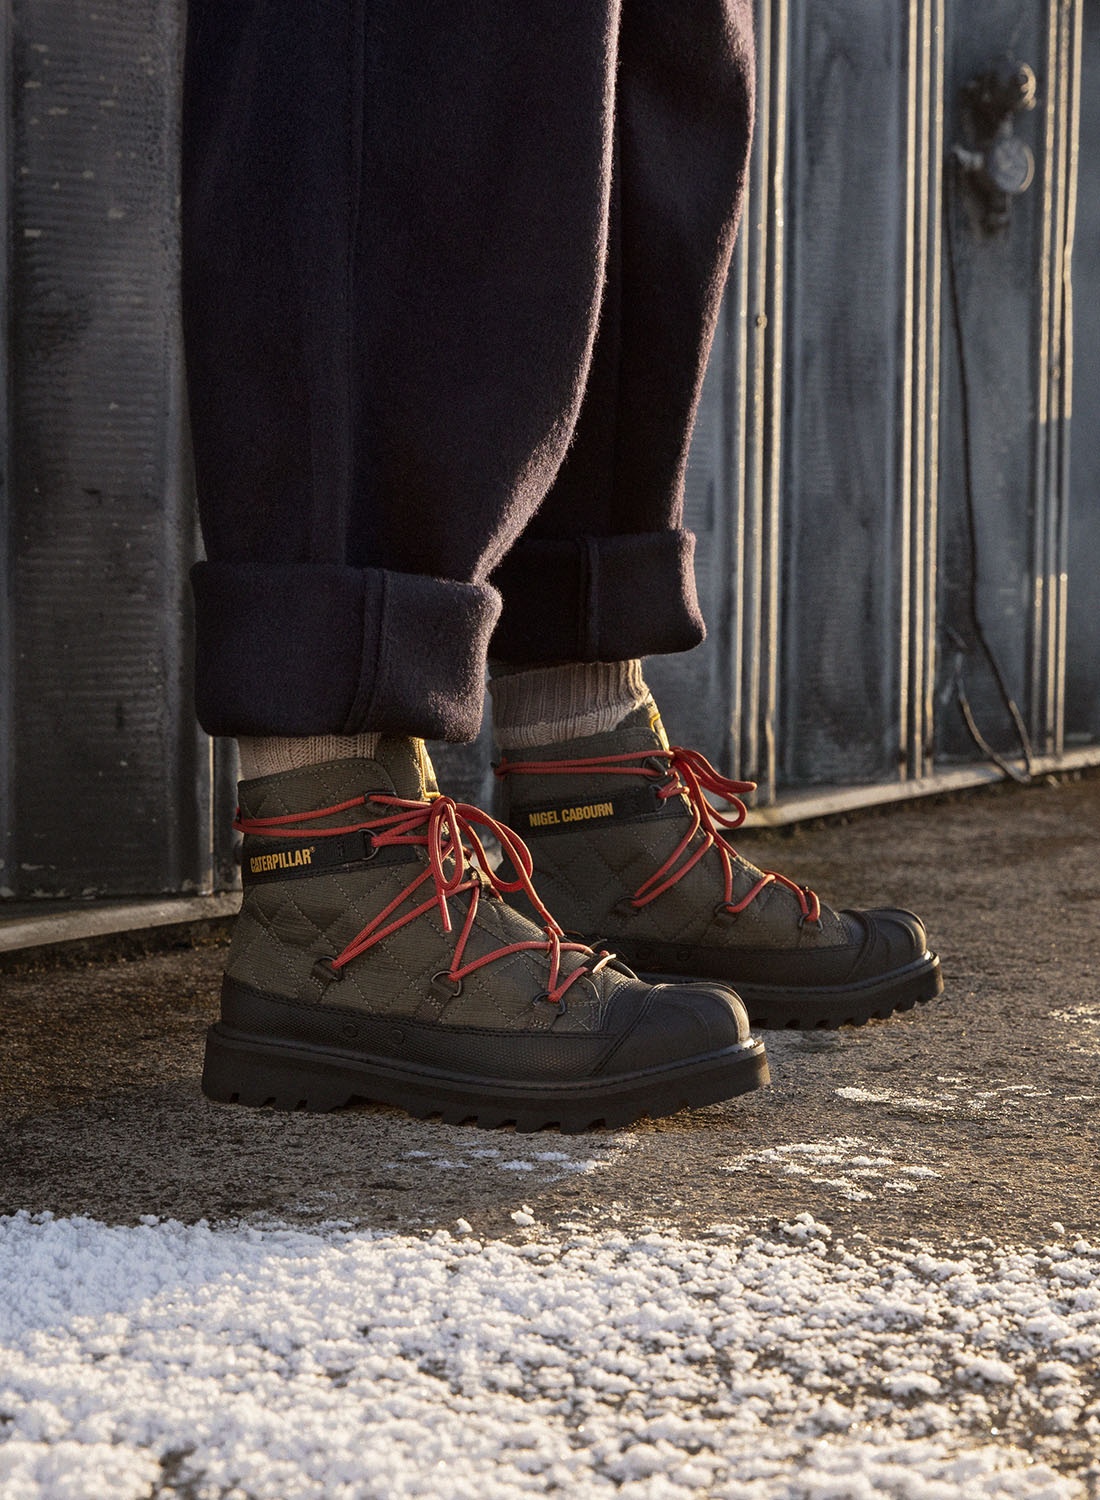 CAT Footwear x Nigel Cabourn Omaha Lace in Olive Night - 3